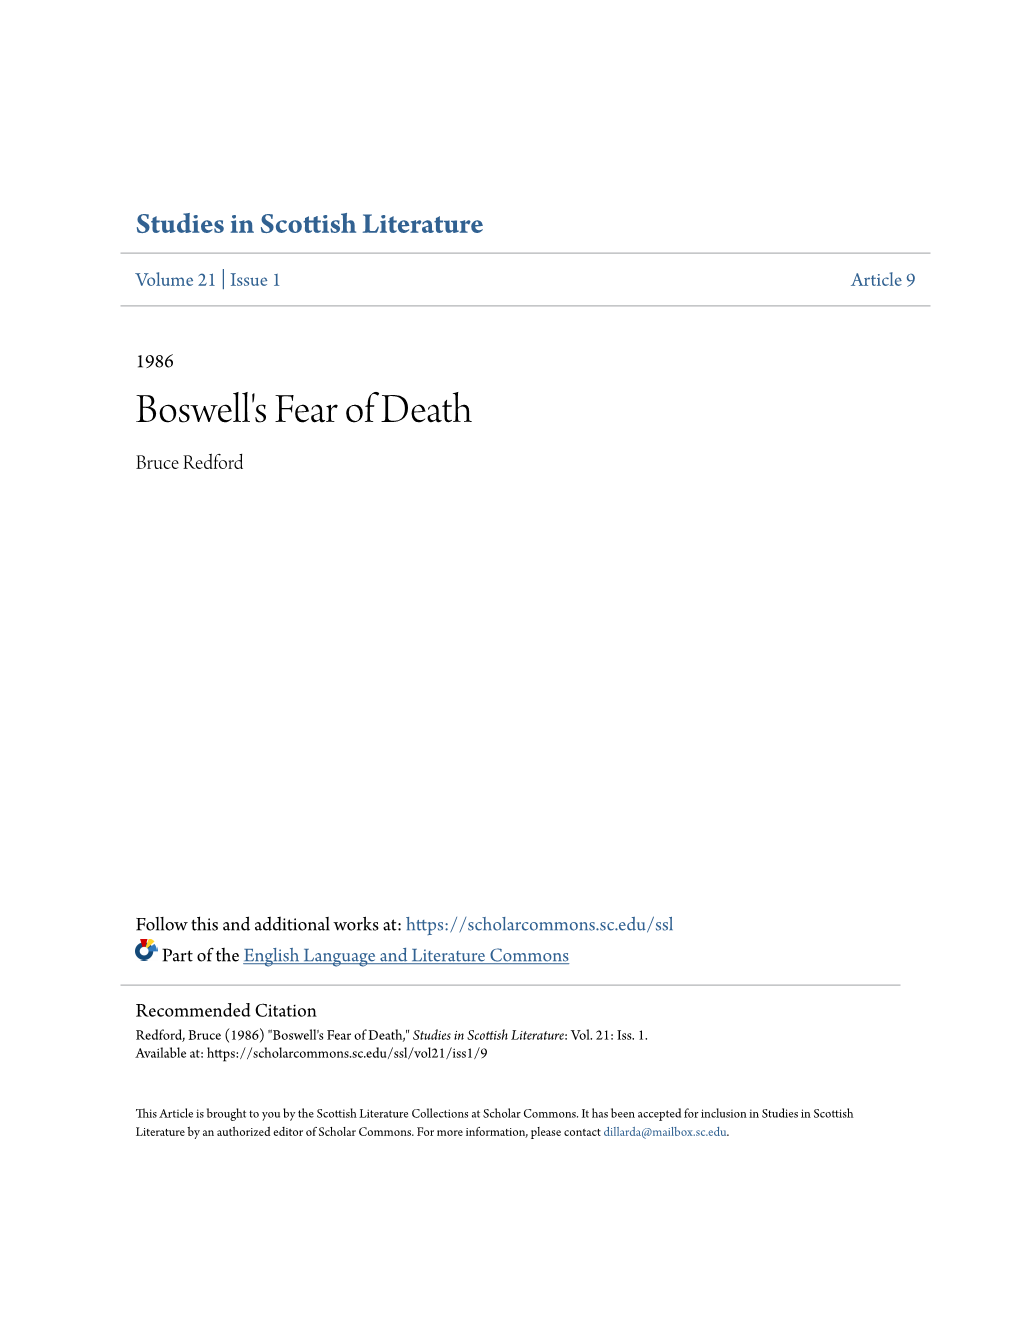 Boswell's Fear of Death Bruce Redford